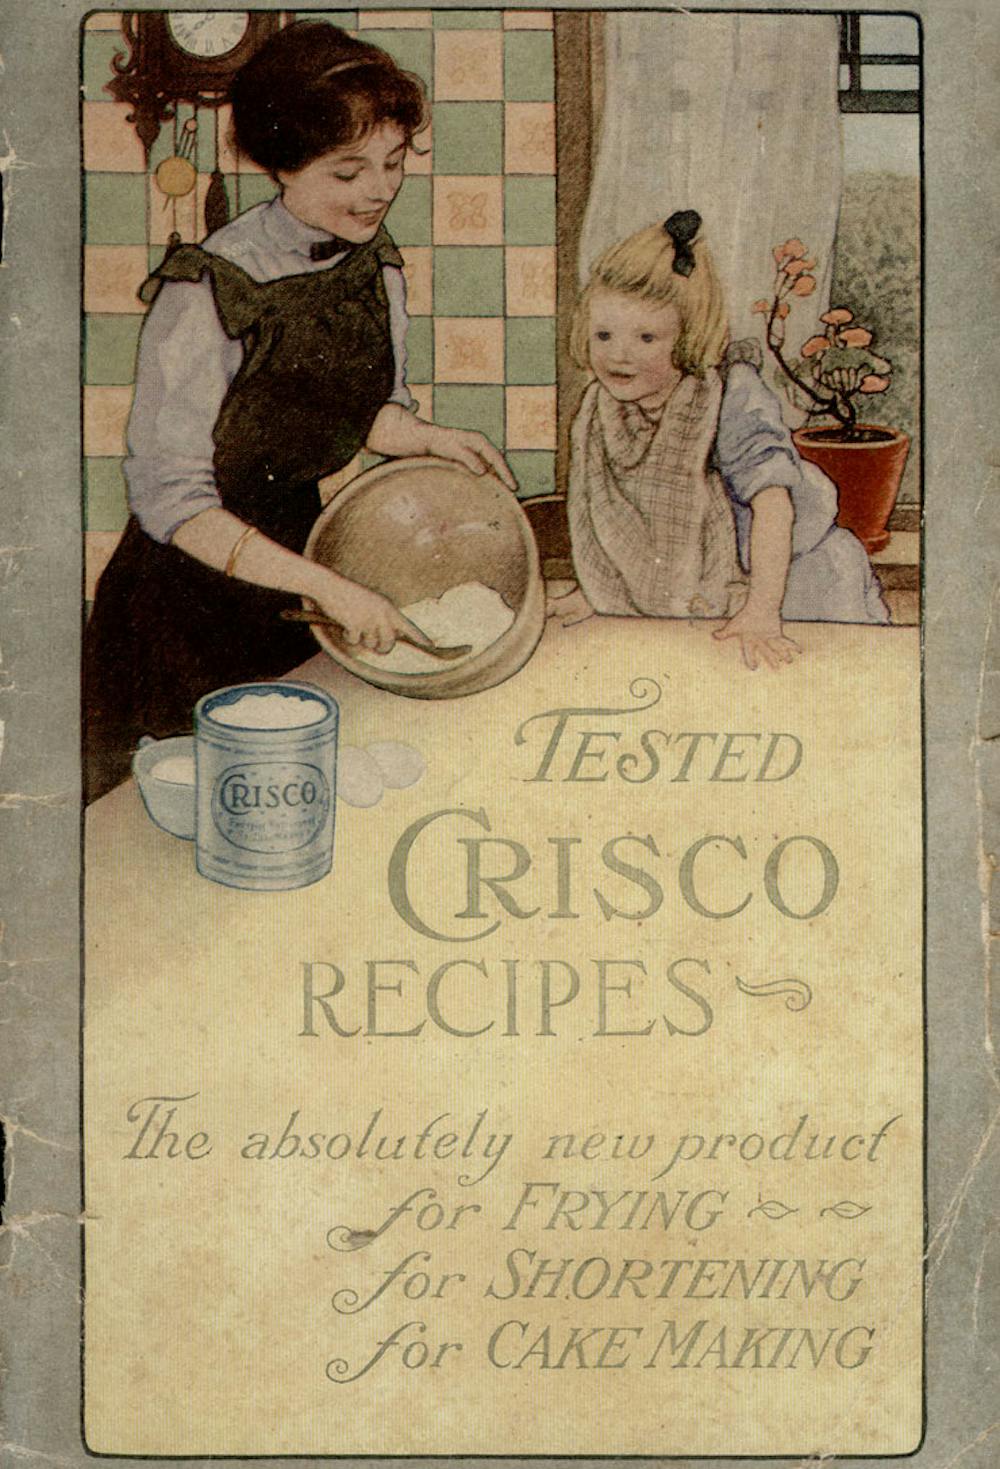 The Real Reason People Stopped Buying Crisco